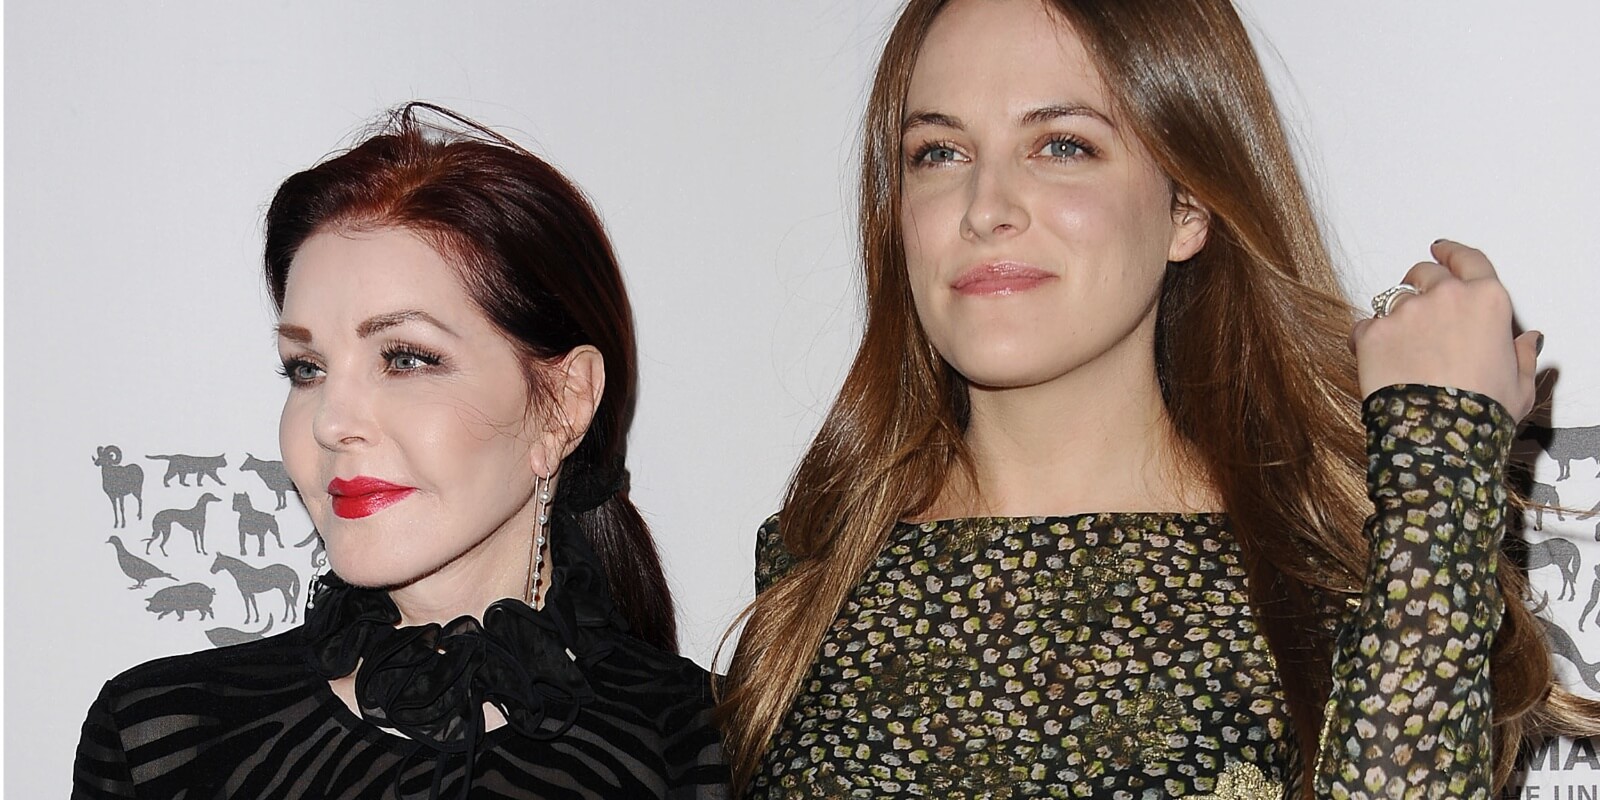 Priscilla Presley and Riley Keough photographed at a red carpet event in 2016.